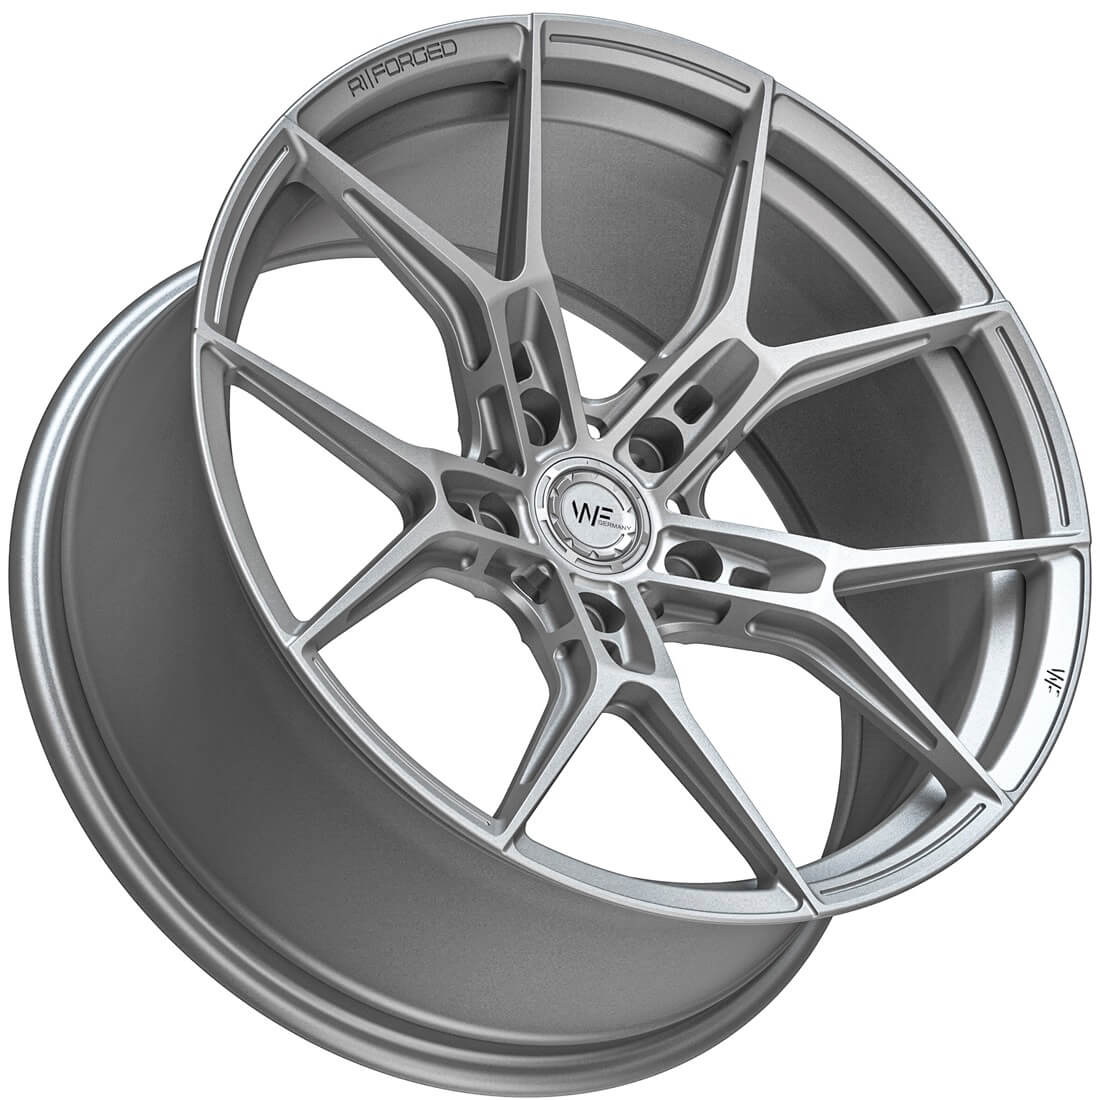 WF RACE.ONE | FORGED - FROZEN SILVER 11.0x22 5x112 XDC - RS EDITION